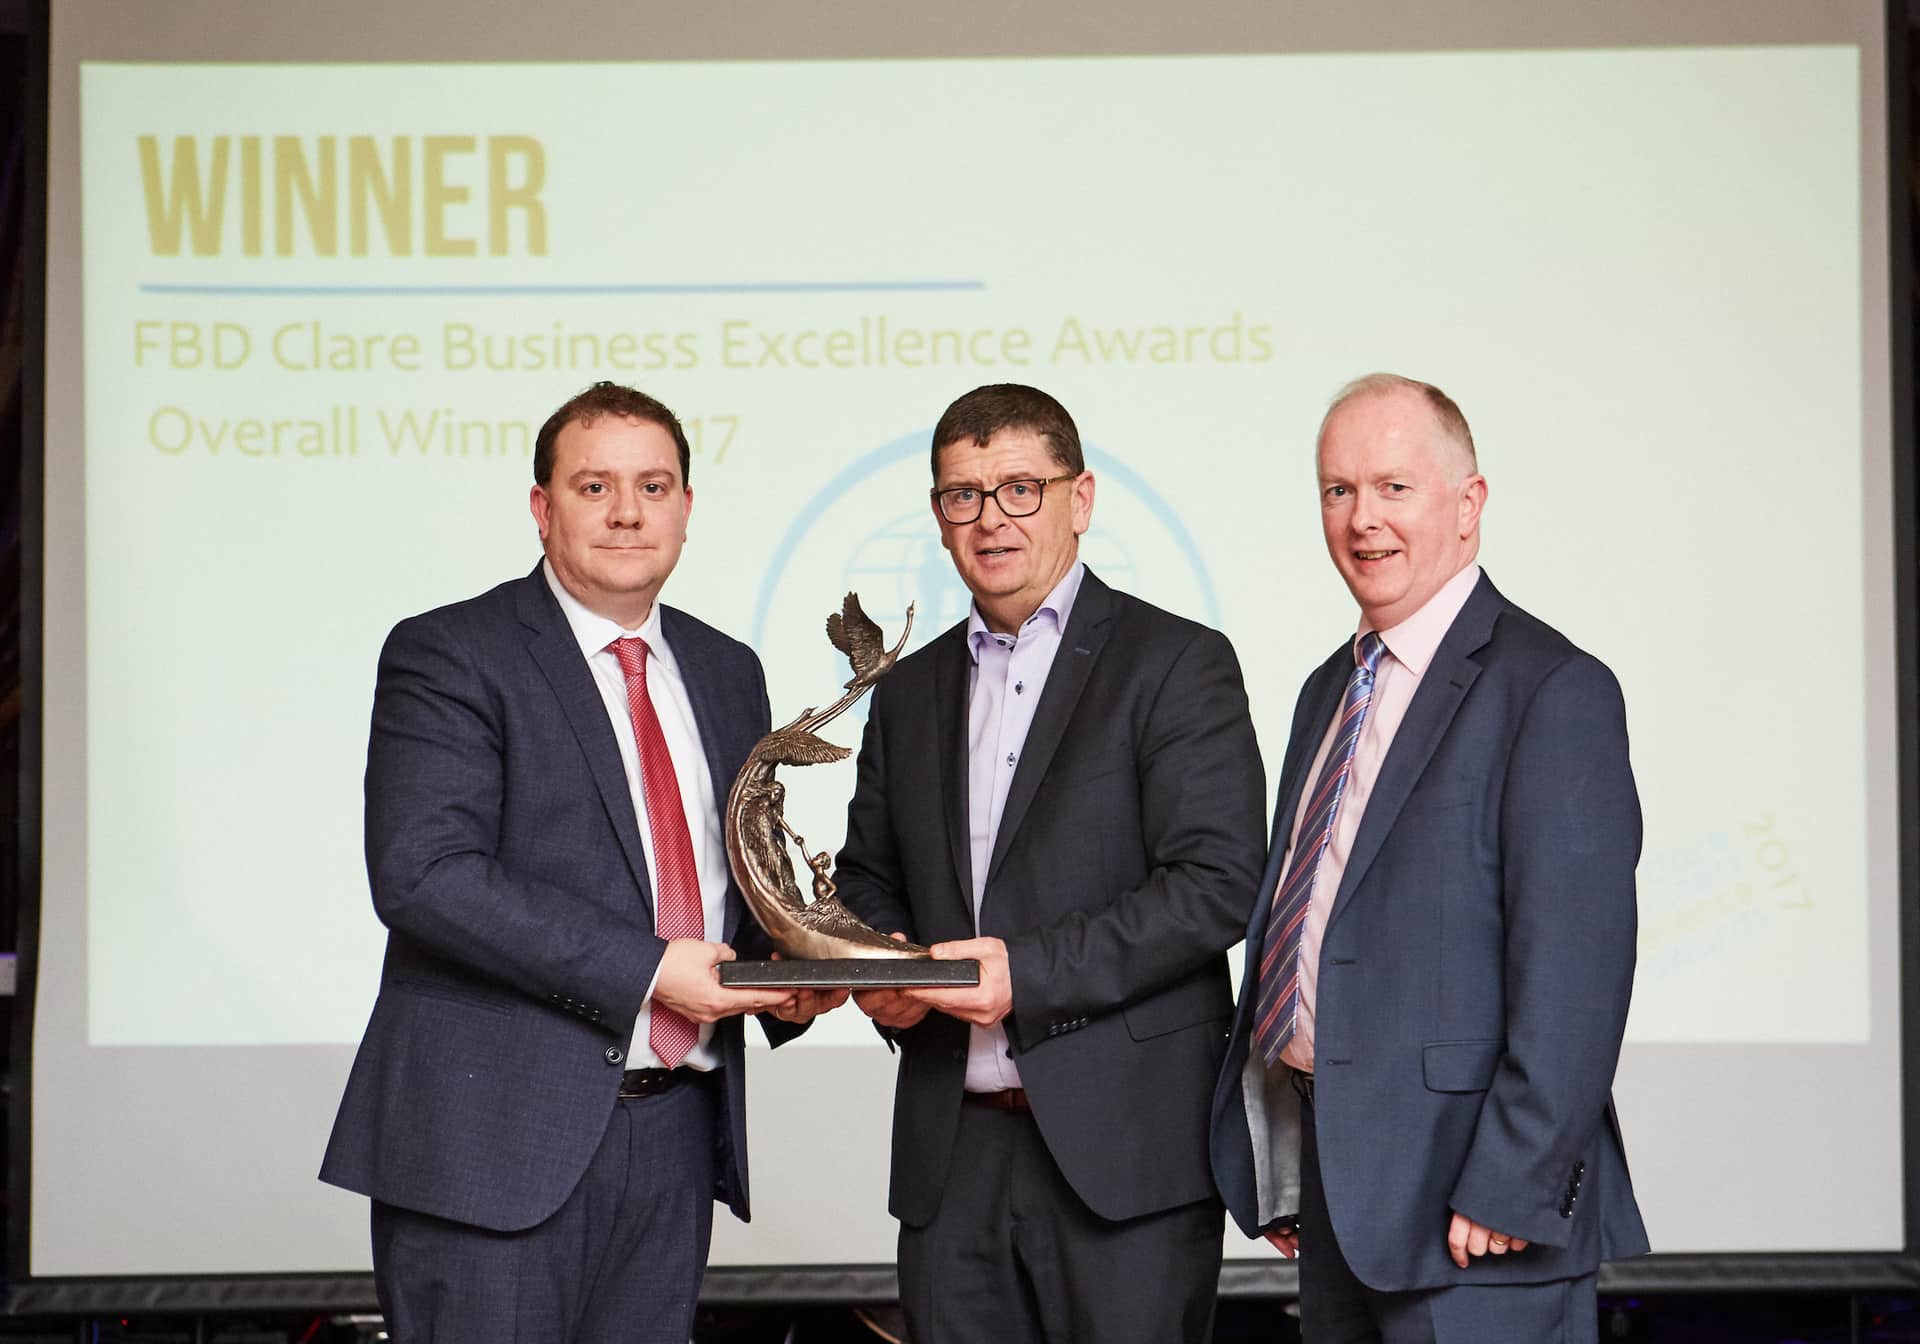 William Cahir President Ennis Chamber of Commerce, Louis Fay General Manager St Francis Credit Union (overall winner) and Mike Byrne MD of Acton BV. Photo: Mike Mulcaire